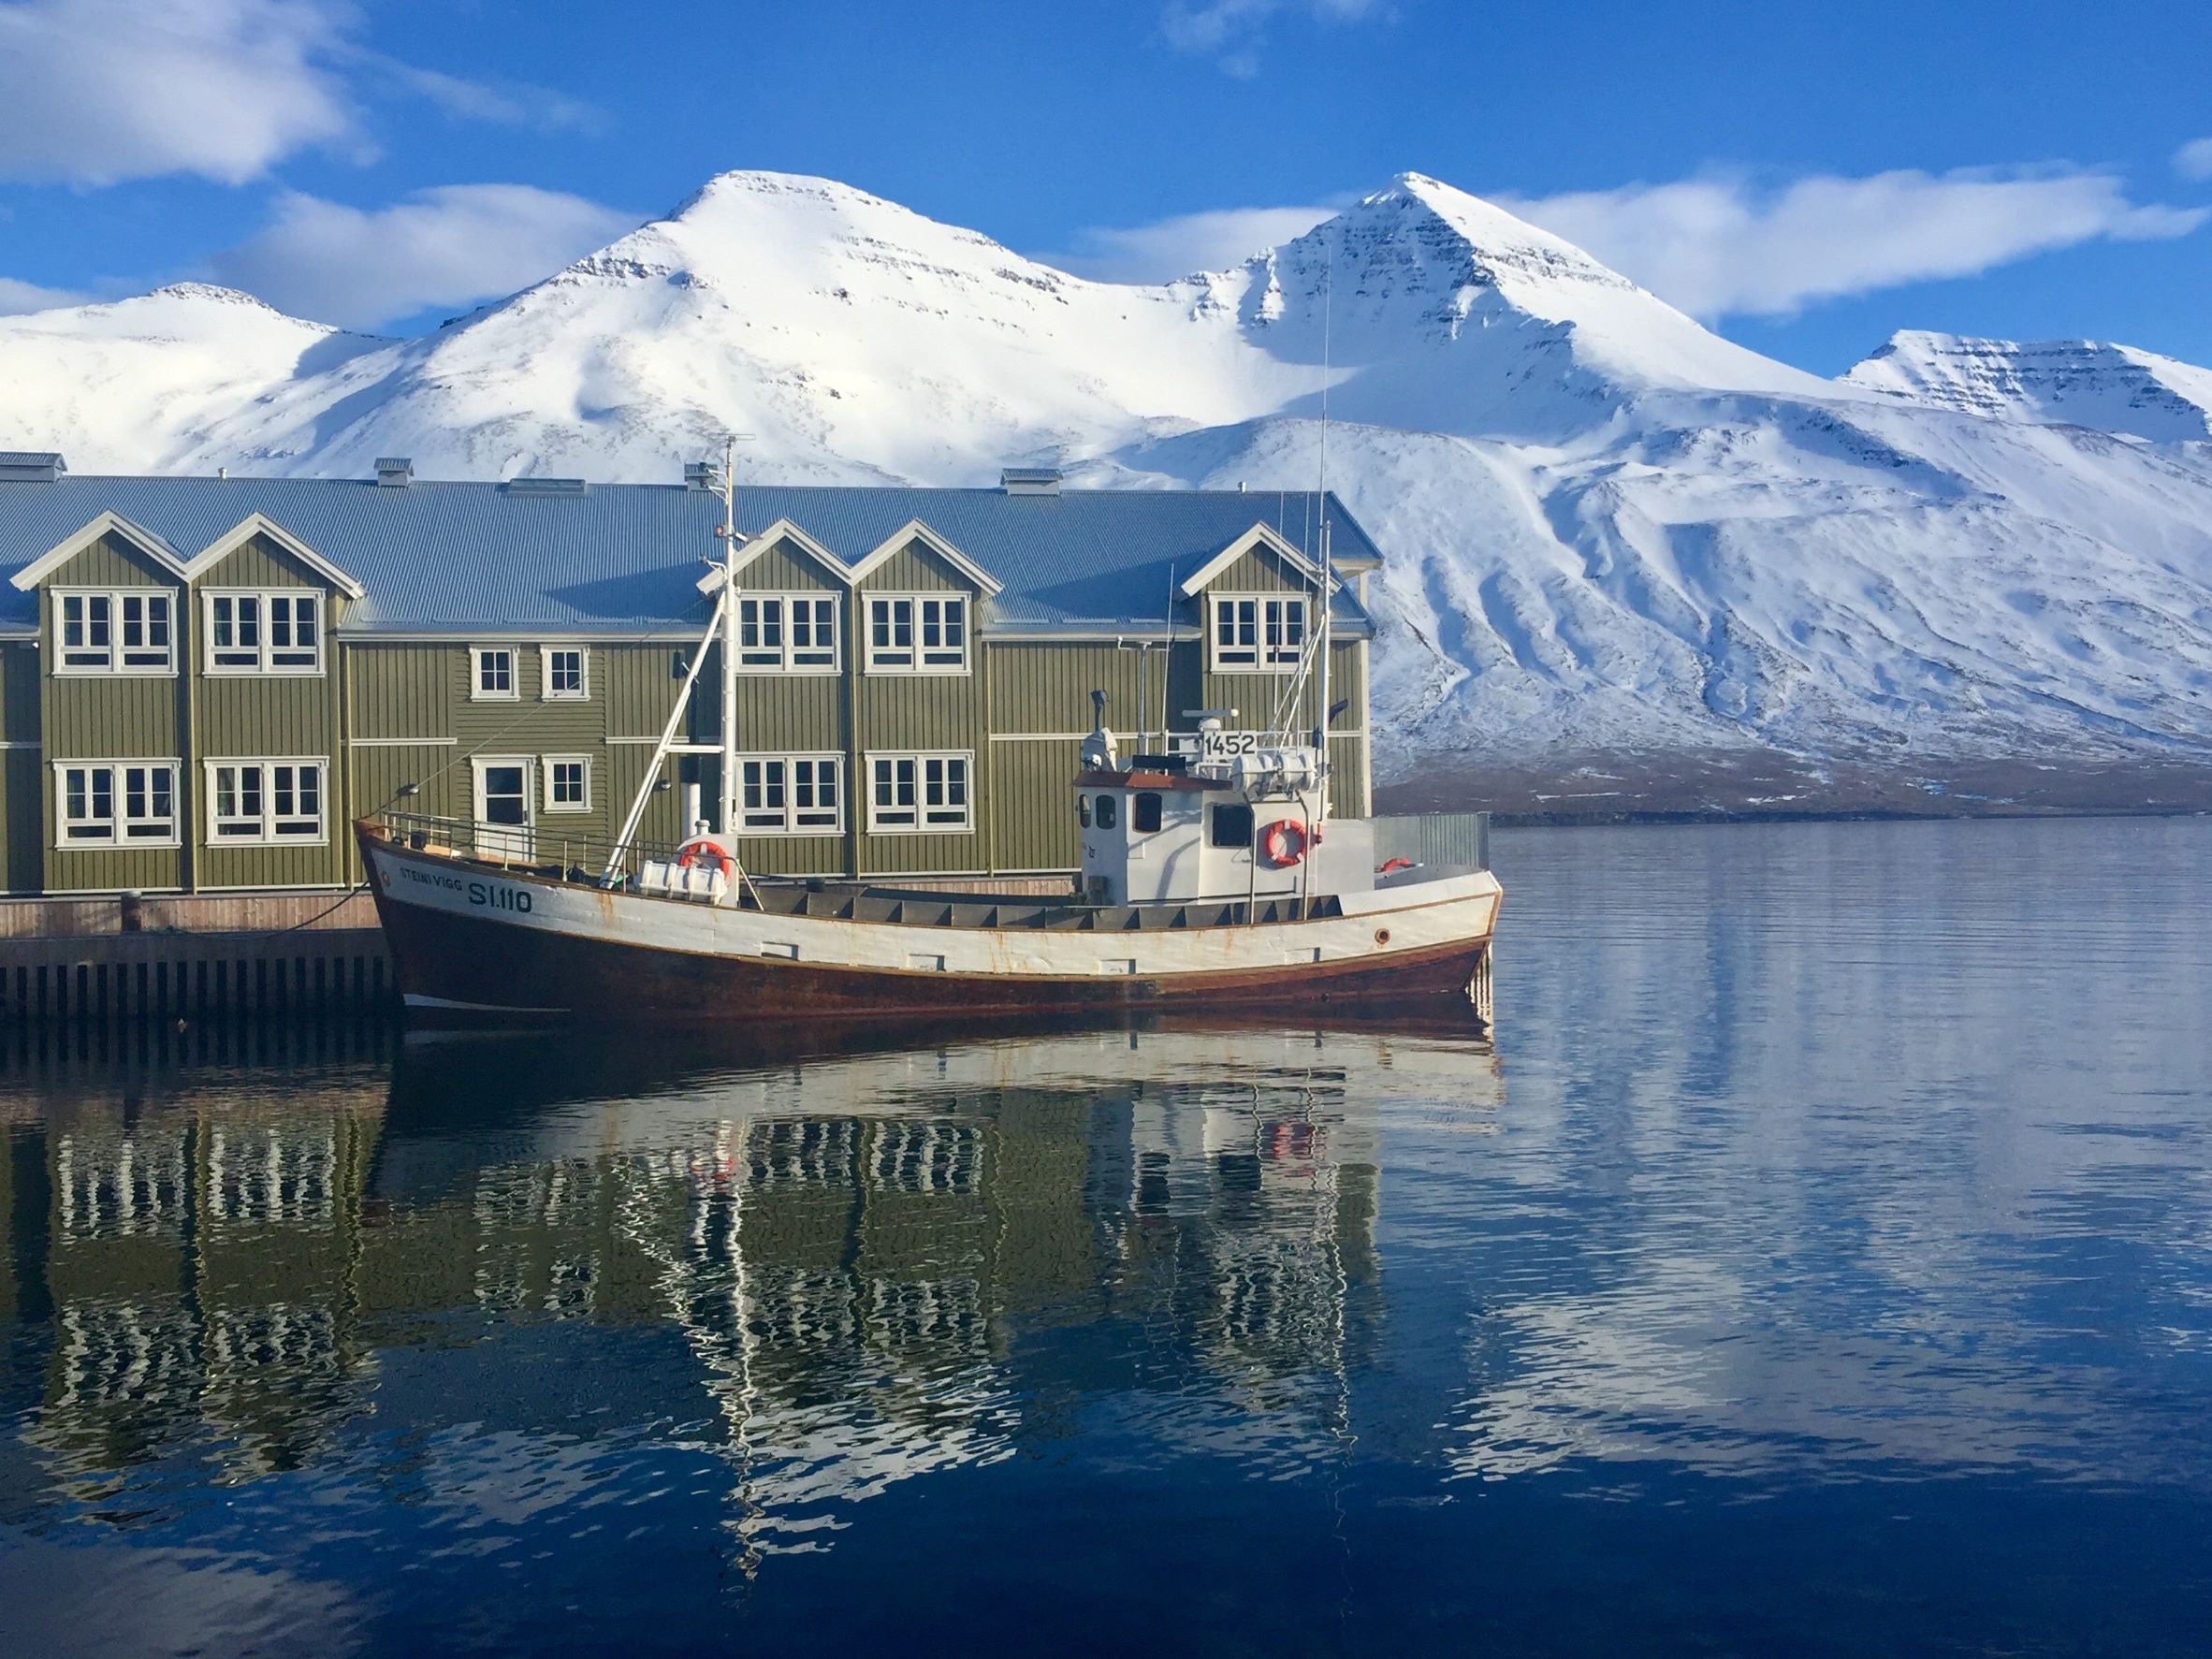 A boat is moored outside a green waterfront building in Siglufjörður, with snowy mountains as a backdrop